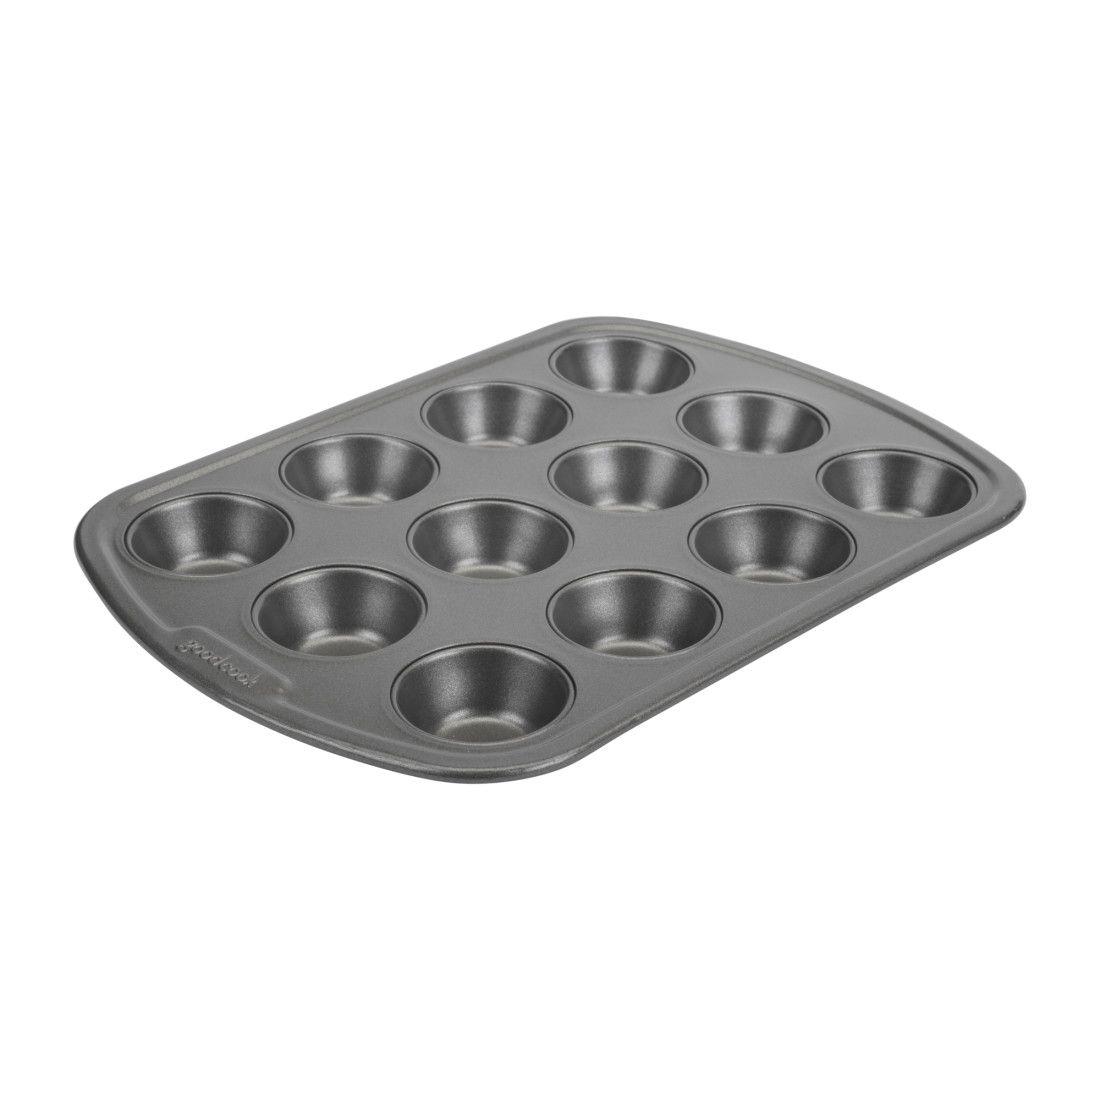 Wilton Bake It Better Non-Stick Muffin Pan, Steel, 12-Cup